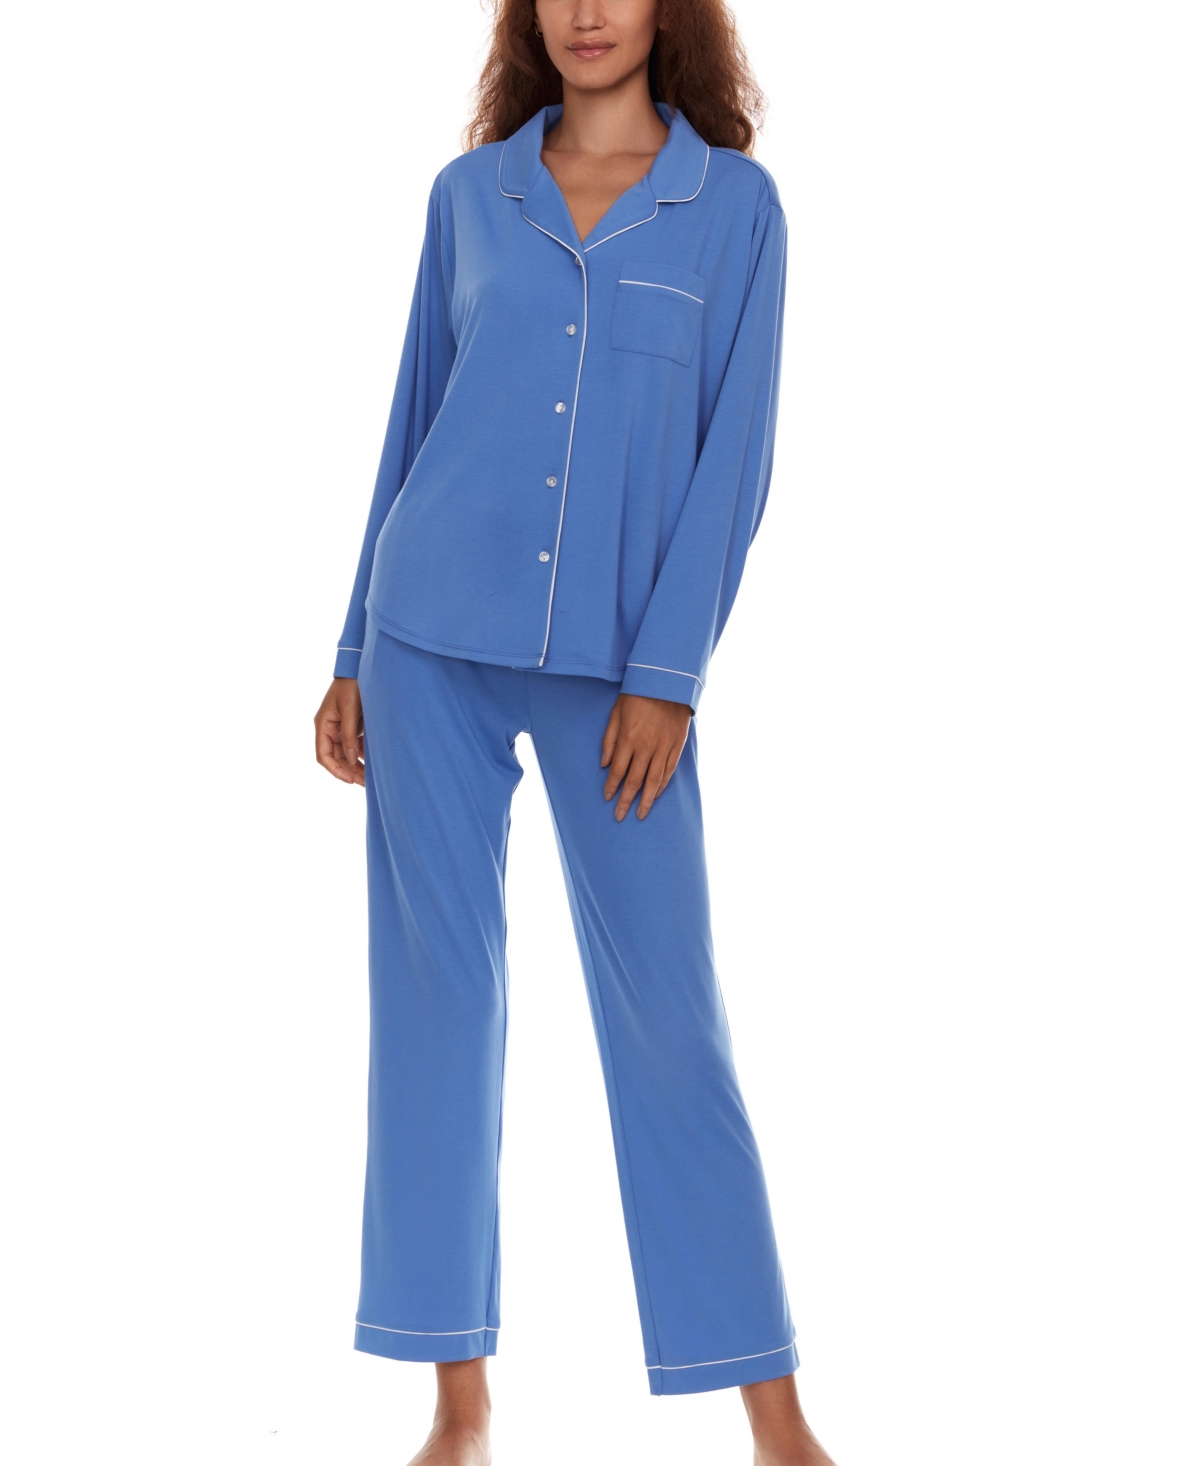 Flora By Flora Nikrooz Women's Annie 2 Piece Notch Long Sleeve Top And Knit Pants Pajama Set In Blue